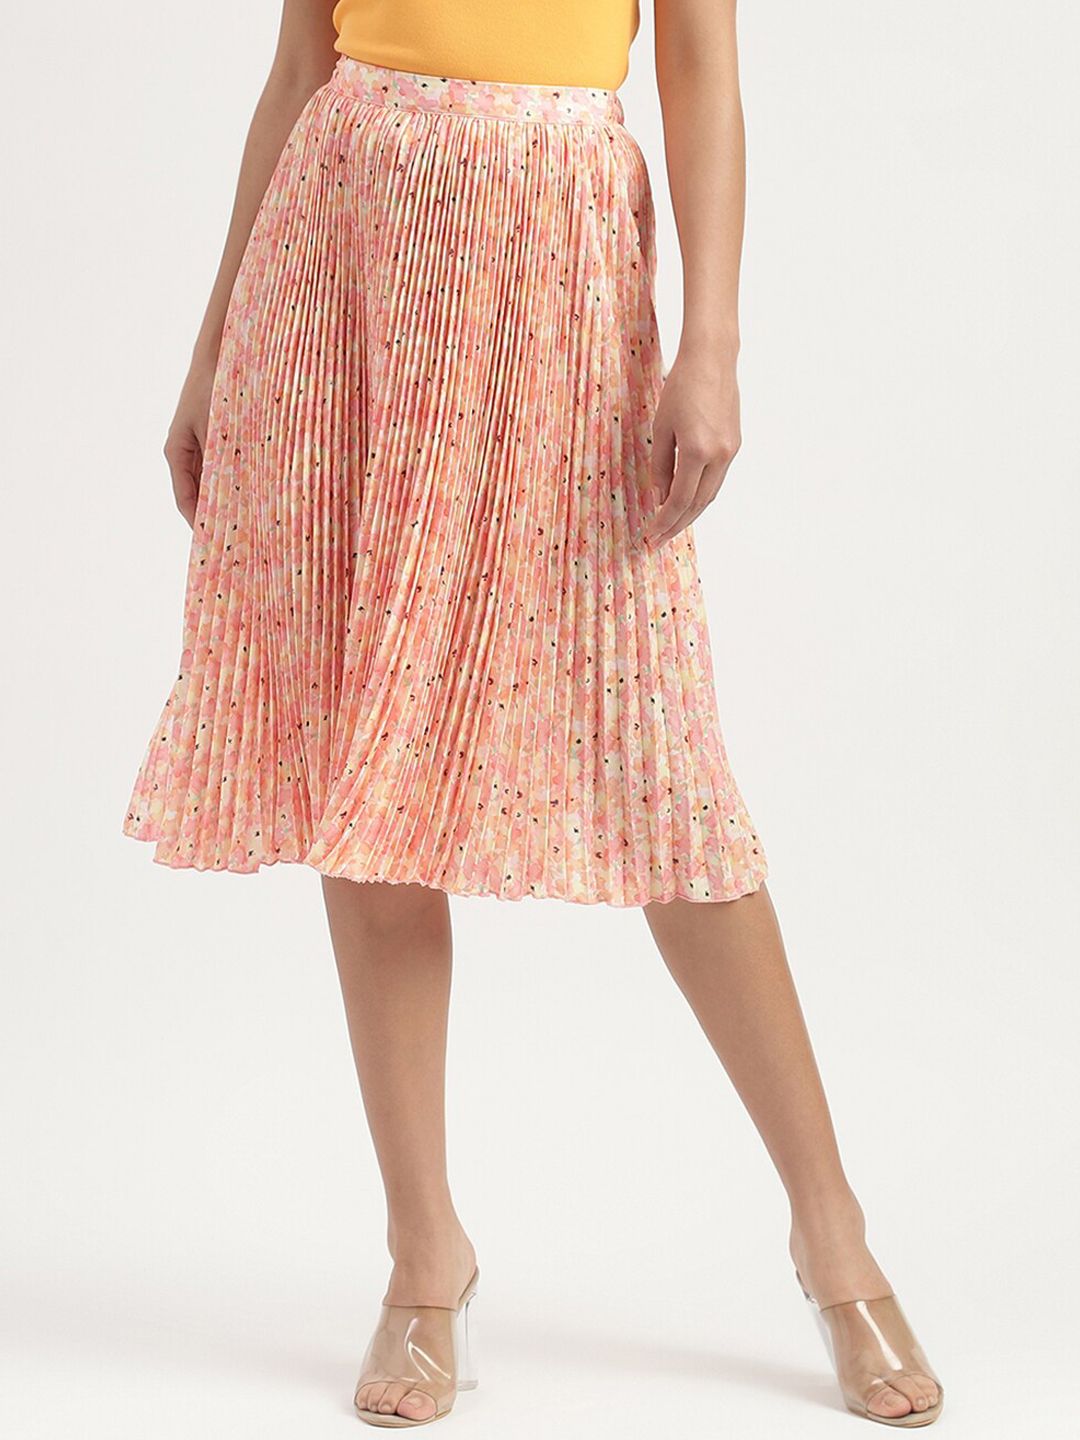 United Colors of Benetton Printed Accordian Pleats Modal Knee Length Skirt Price in India